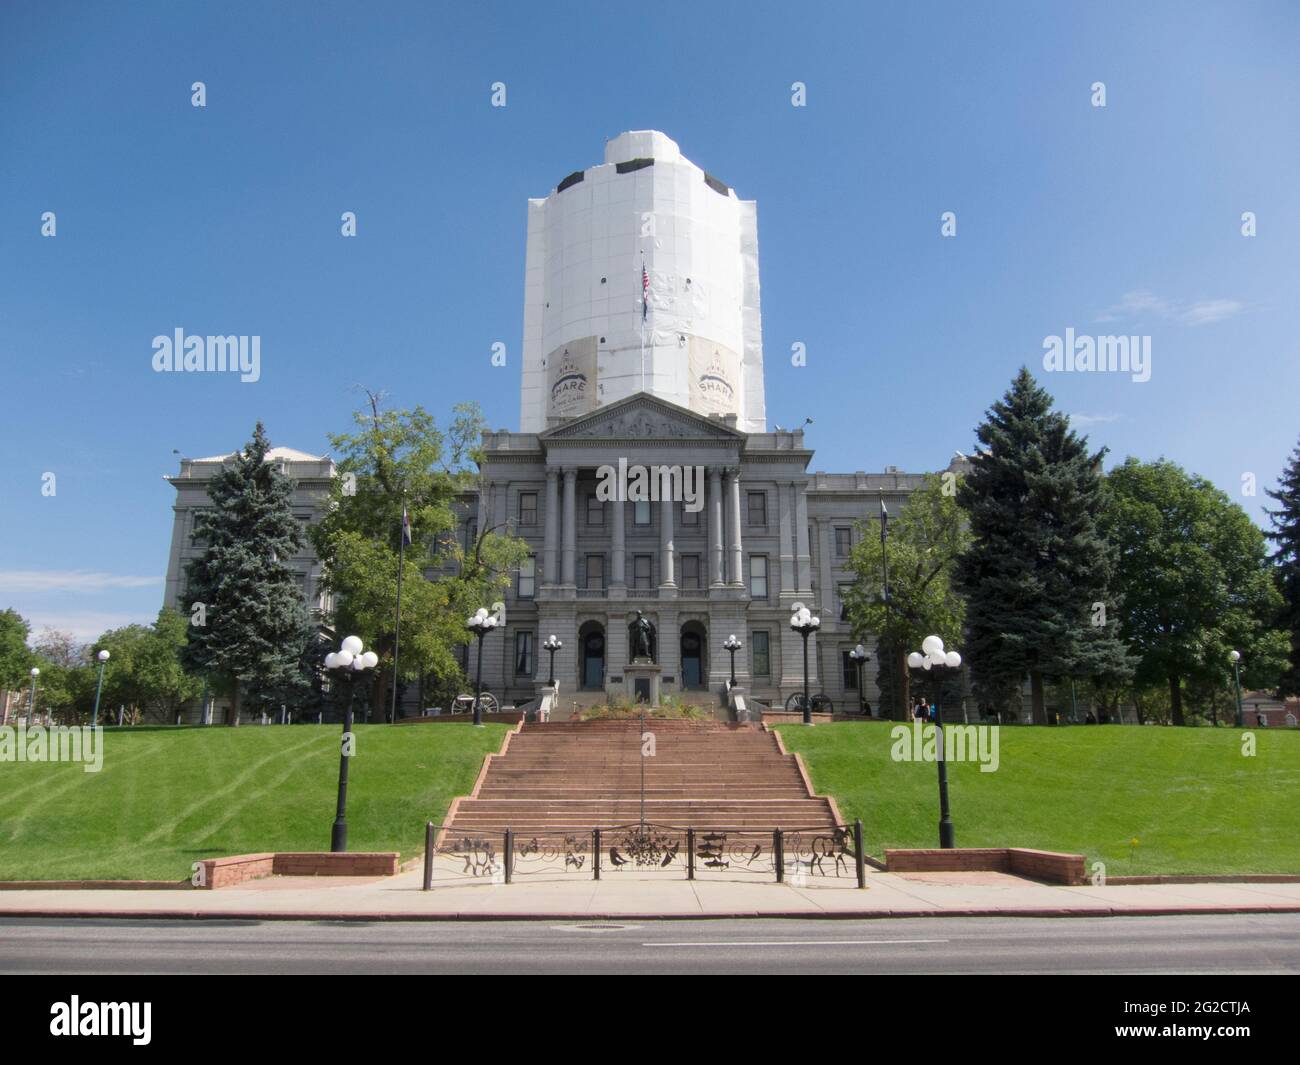 The Colorado state capital building during a dome renovation in 2013. In Denver, Colorado. Stock Photo